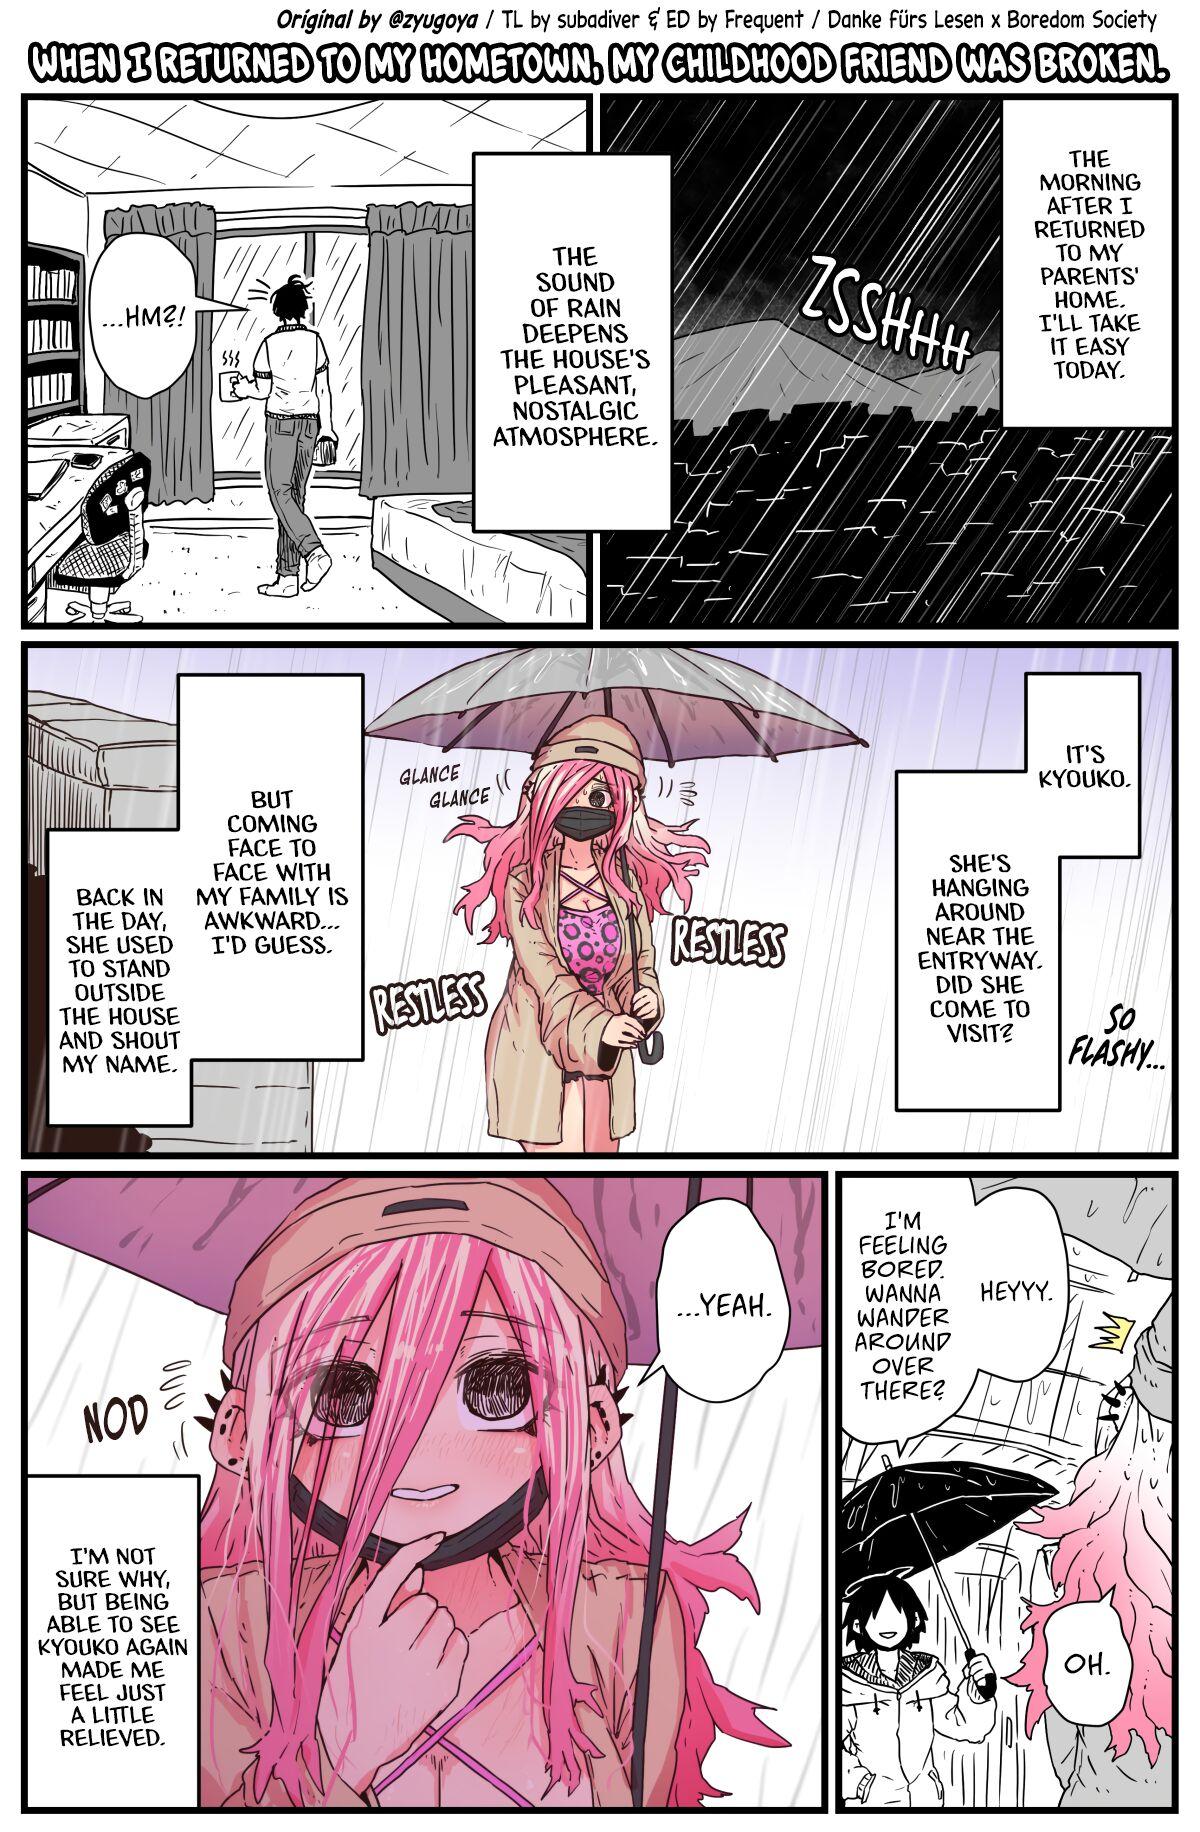 Indonesian When I Returned to My Hometown, My Childhood Friend was Broken - Original Cums - Page 7